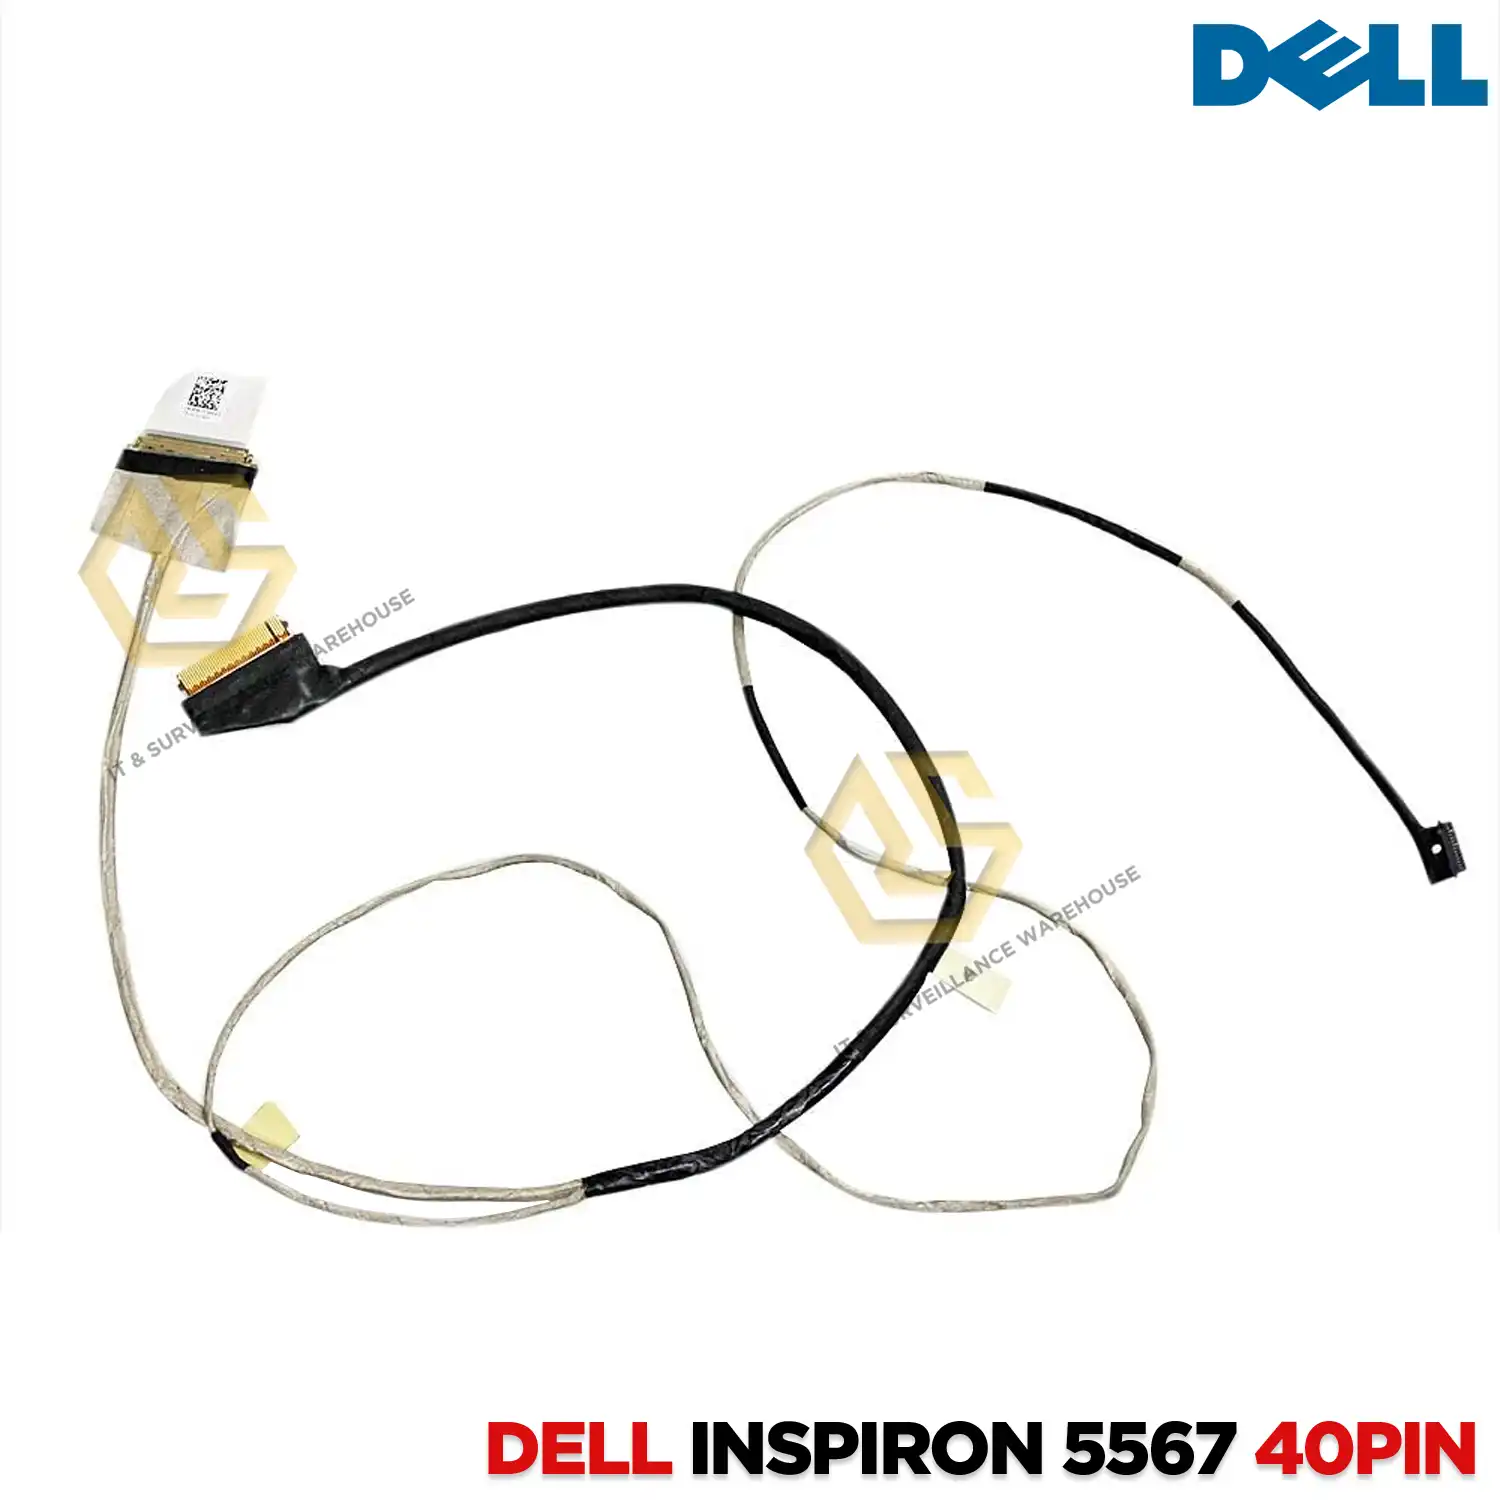 LAPTOP DISPLAY CABLE FOR DELL INSPIRON 5567 | 15-5000 | 15-5565